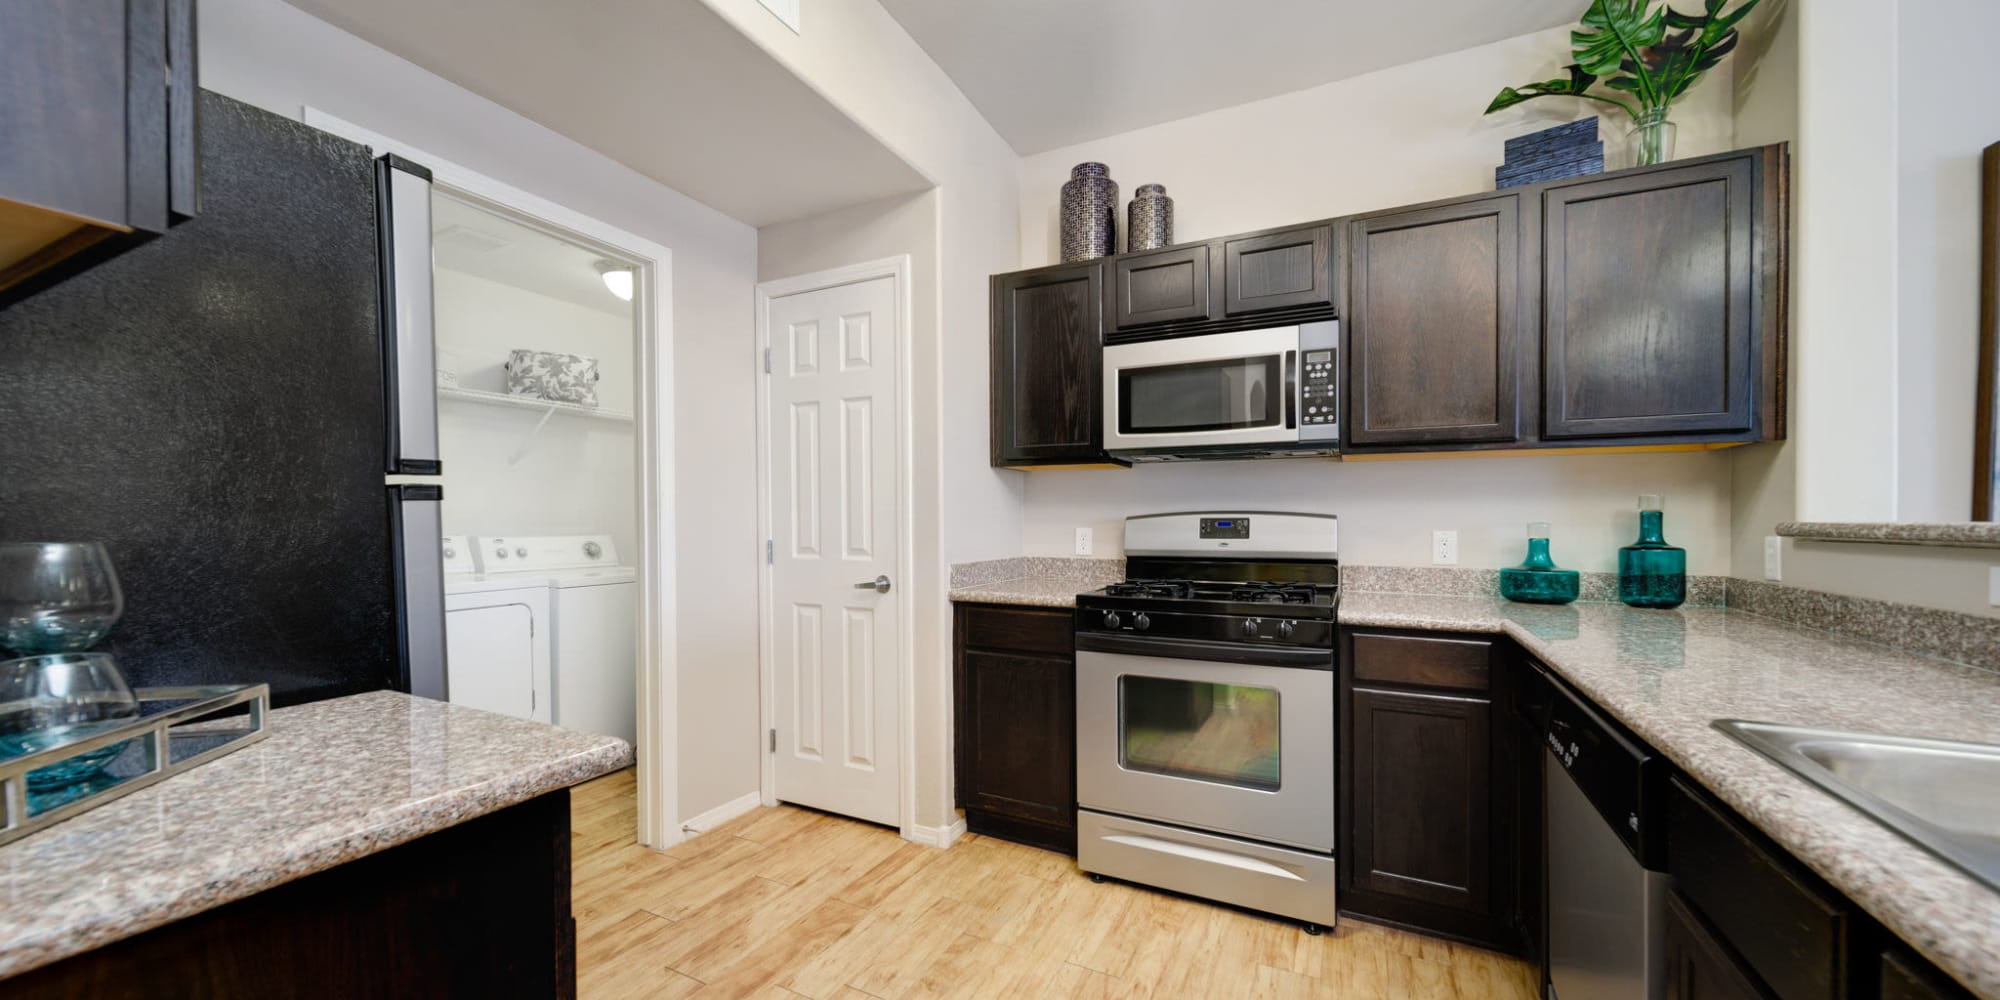 Spacious kitchen at The Trails at Pioneer Meadows in Sparks, Nevada